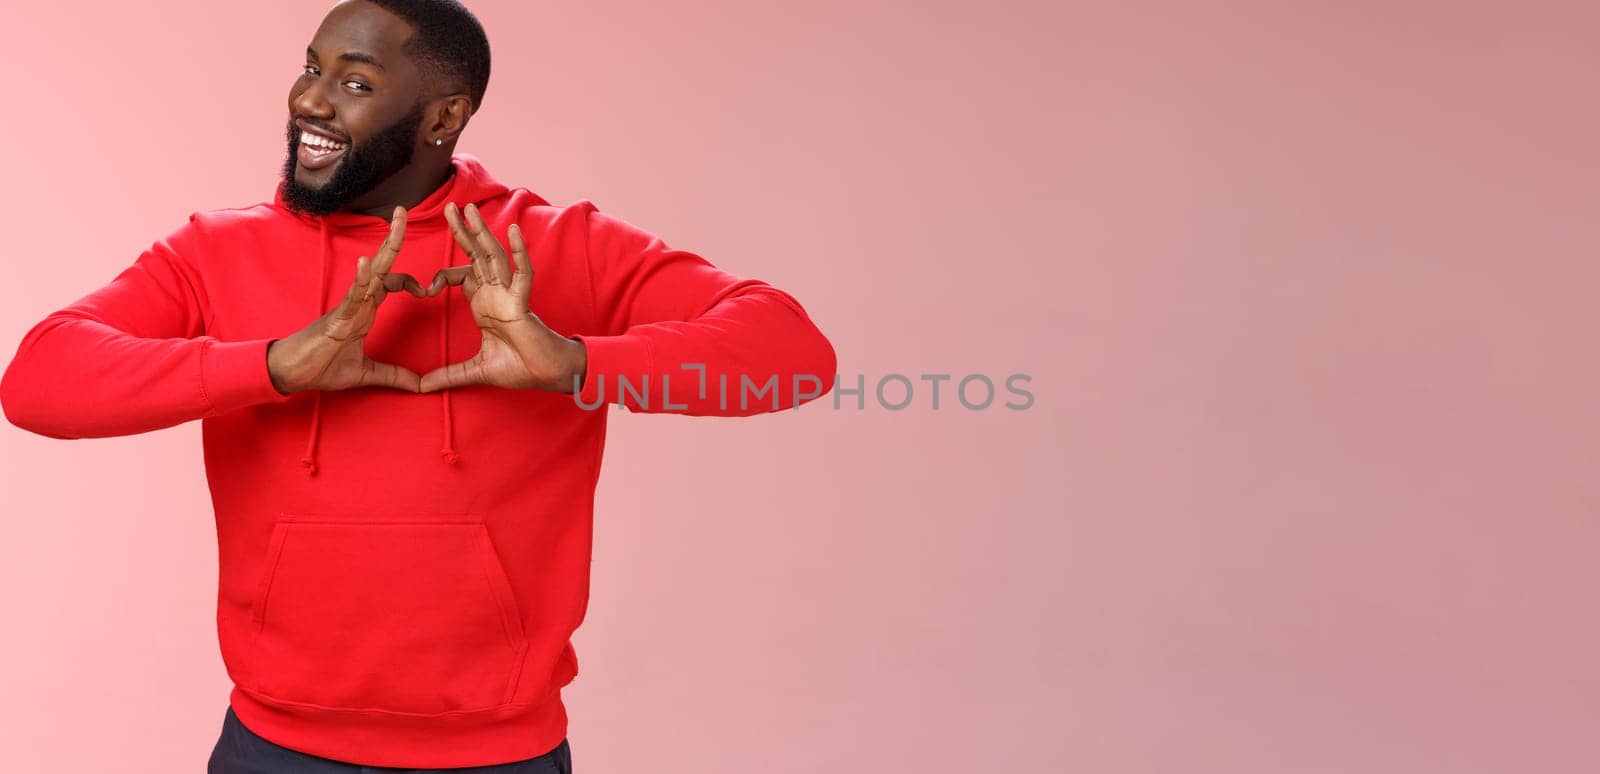 Someone love ya. Portrait enthusiastic creative cute black boyfriend wearing red hoodie show heart sign smiling broadly confessing love sympathy look passionate, express romance pink background.